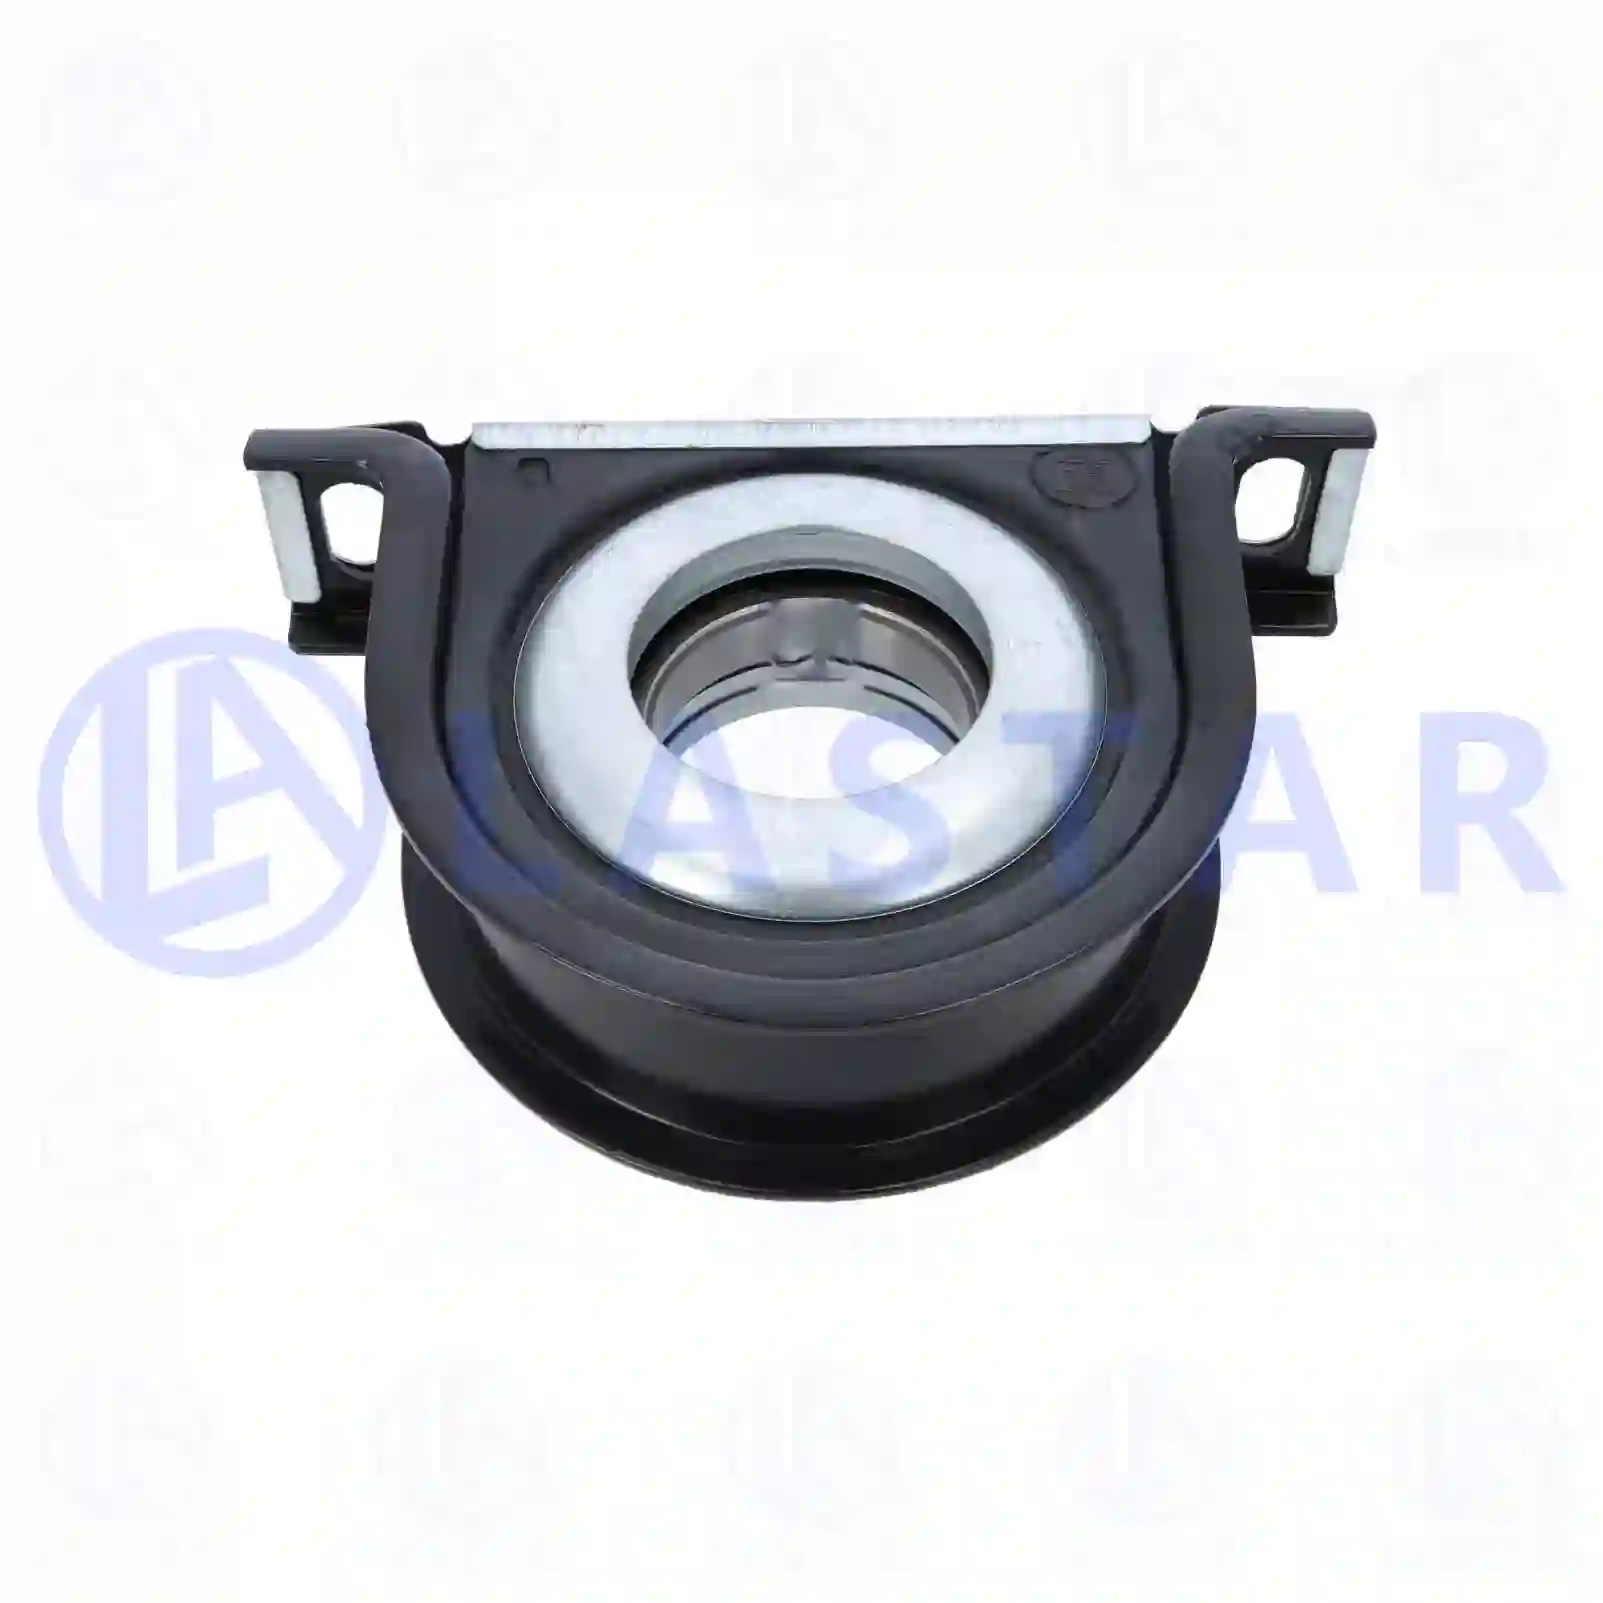 Support Bearing Center bearing, la no: 77734283 ,  oem no:1288220, 1323765, 1435557, ZG02492-0008 Lastar Spare Part | Truck Spare Parts, Auotomotive Spare Parts